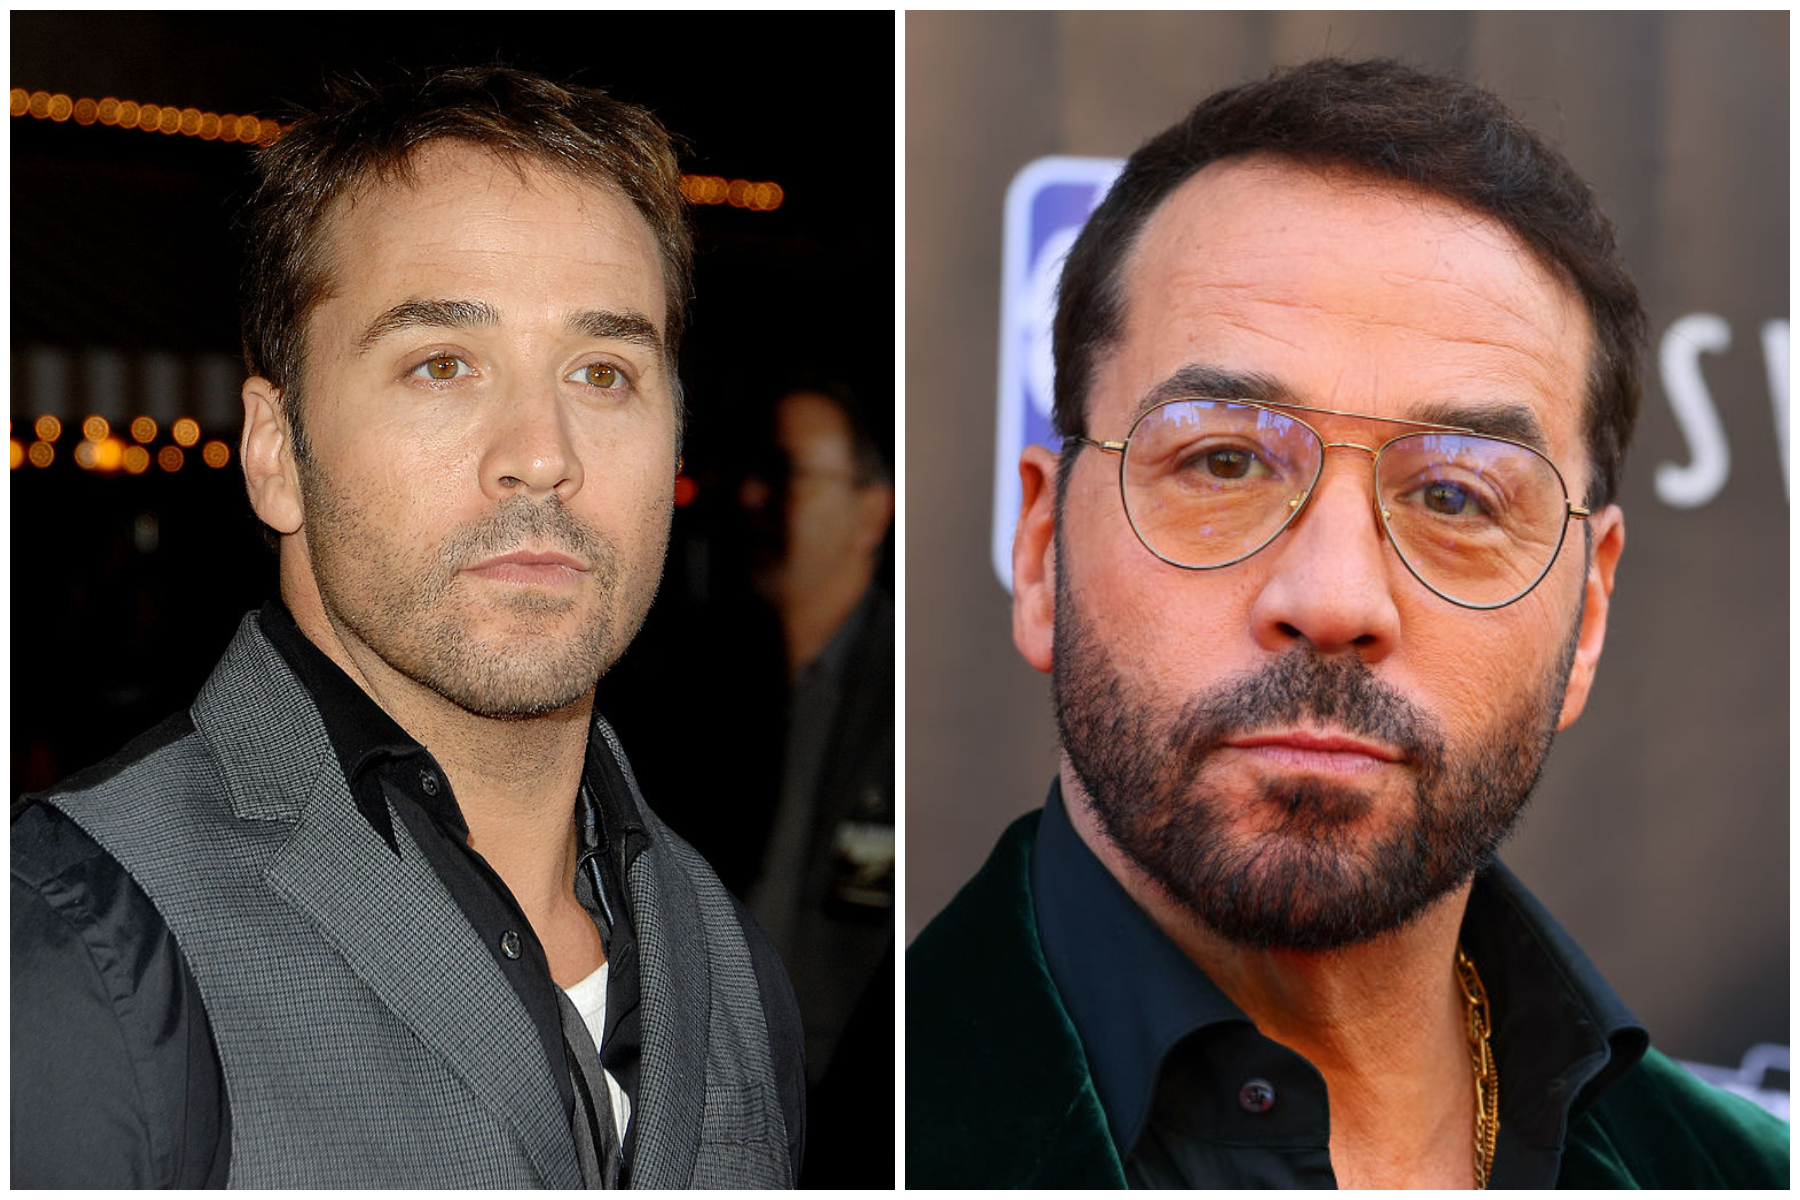 Hair transplant celebrities before and after